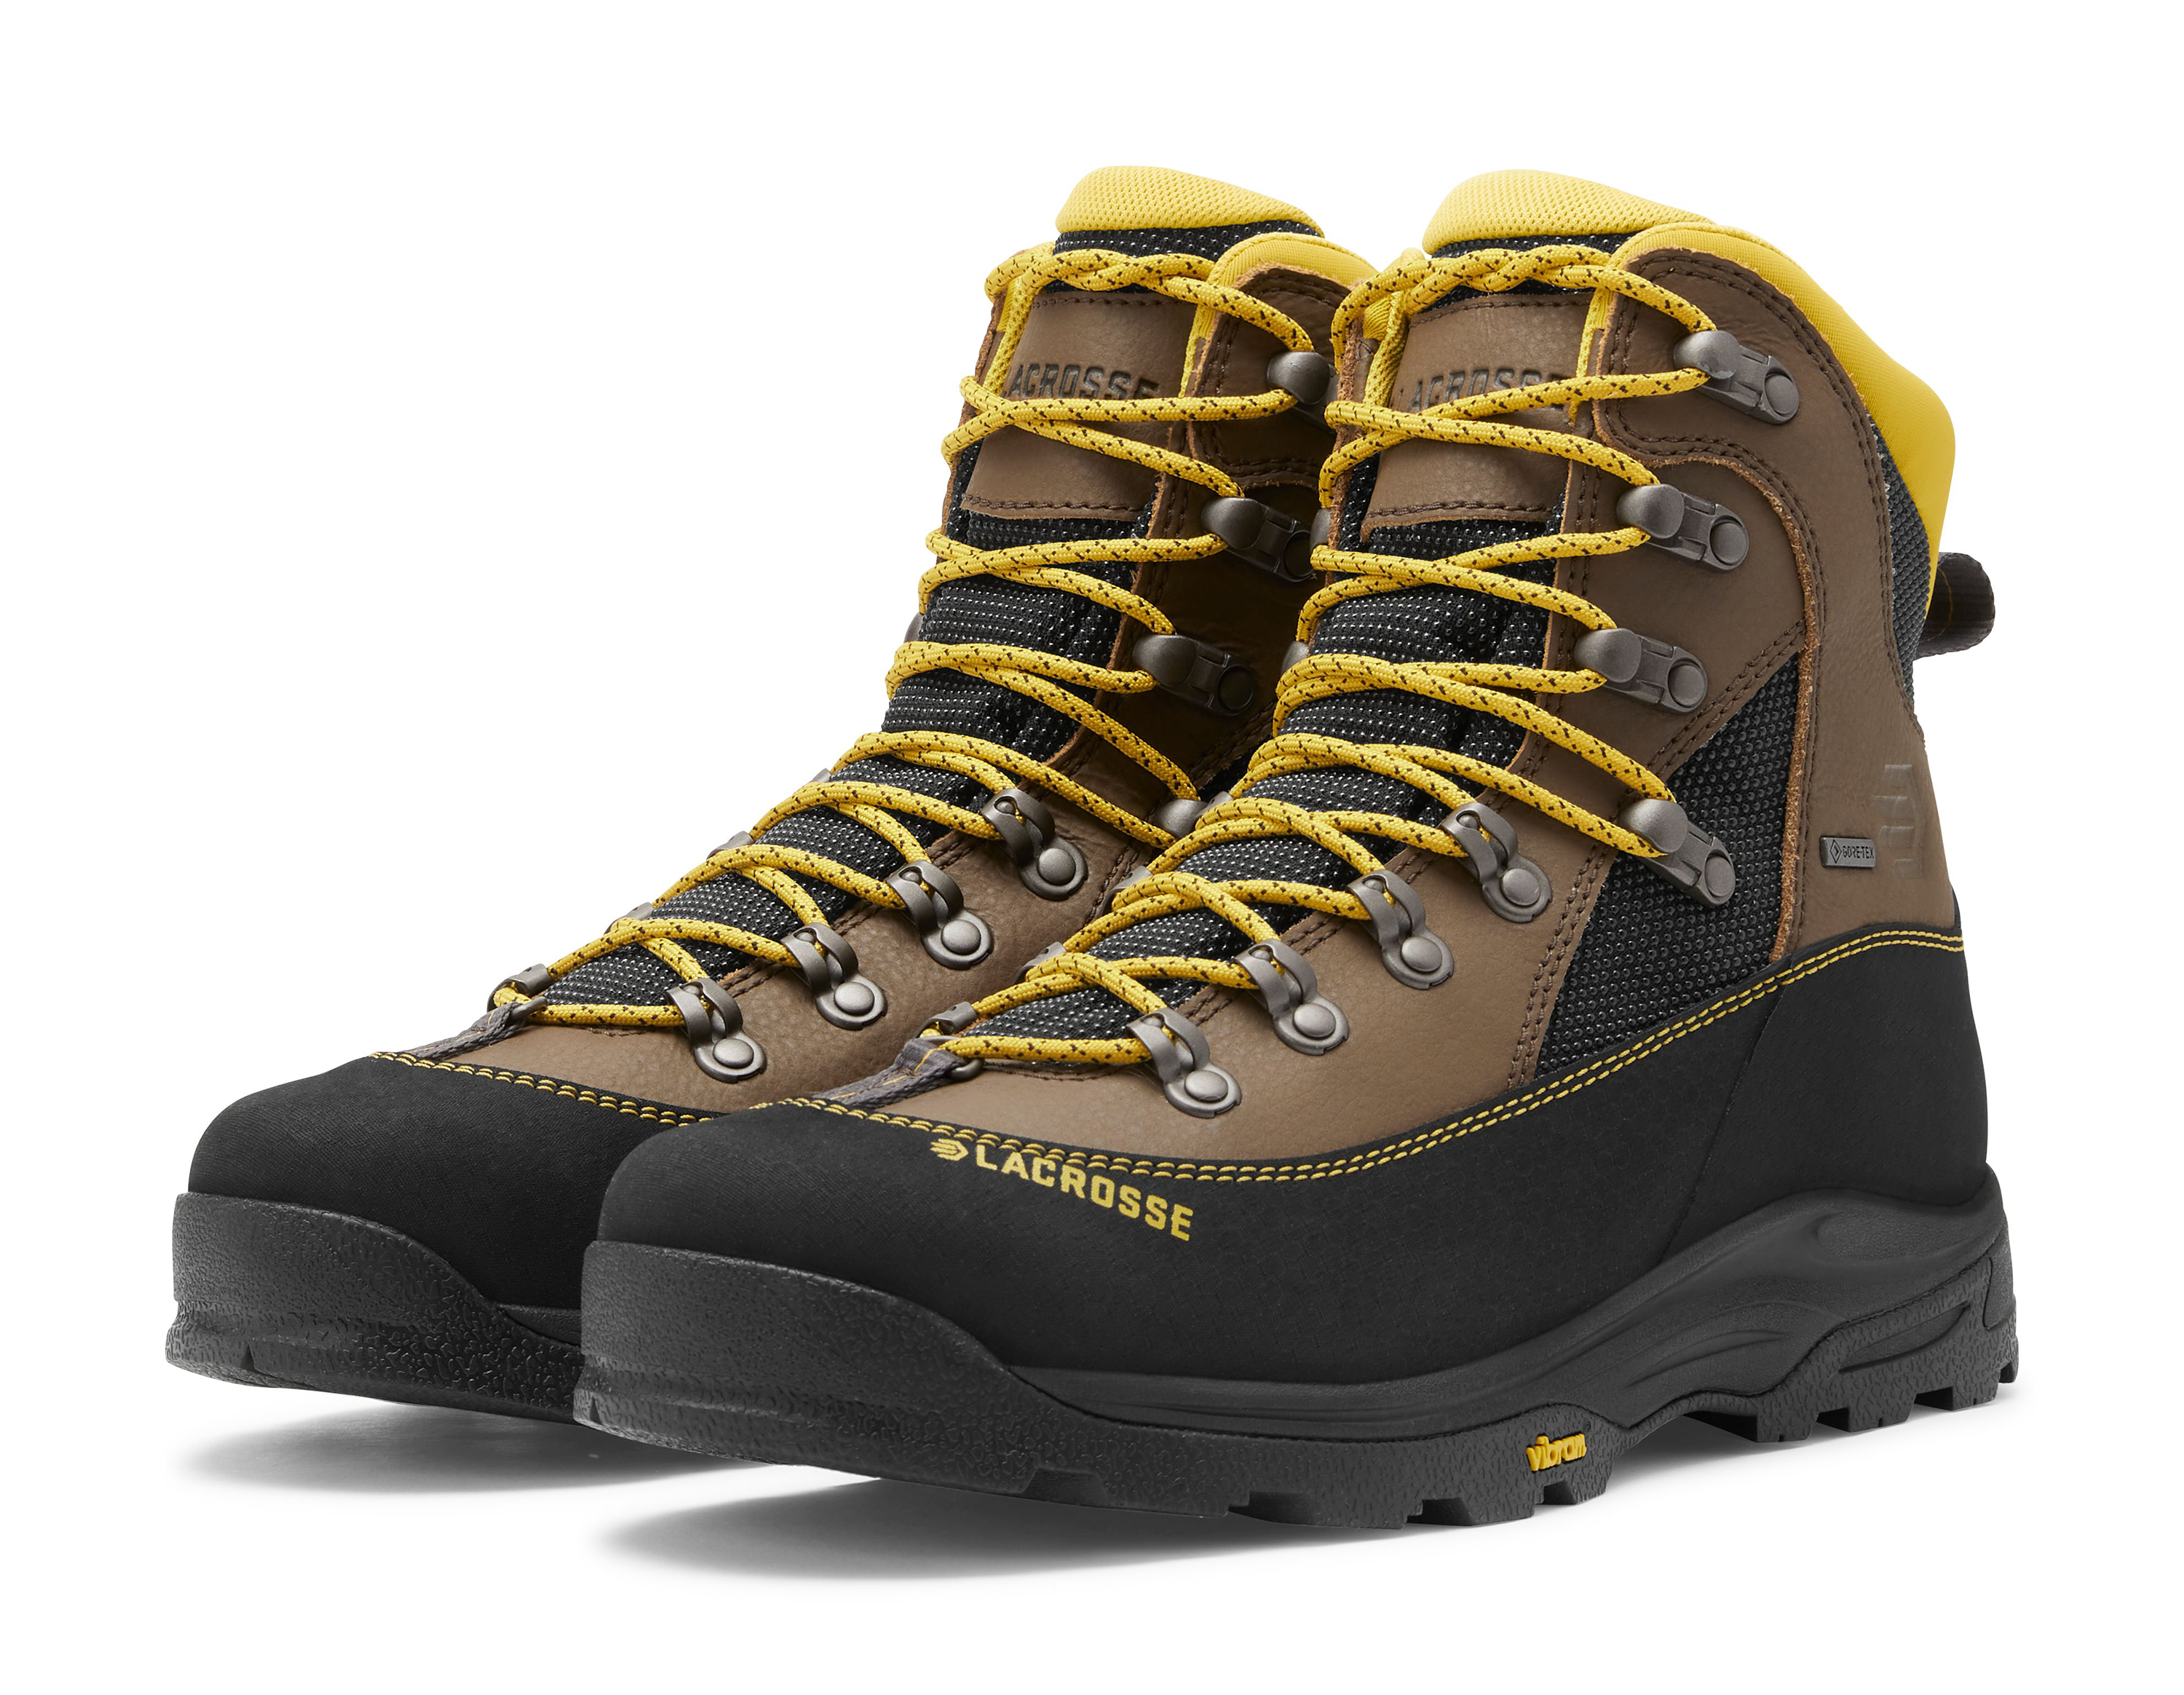 LaCrosse Ursa MS GORE-TEX Hunting Boots for Men - Brown/Gold - 8W